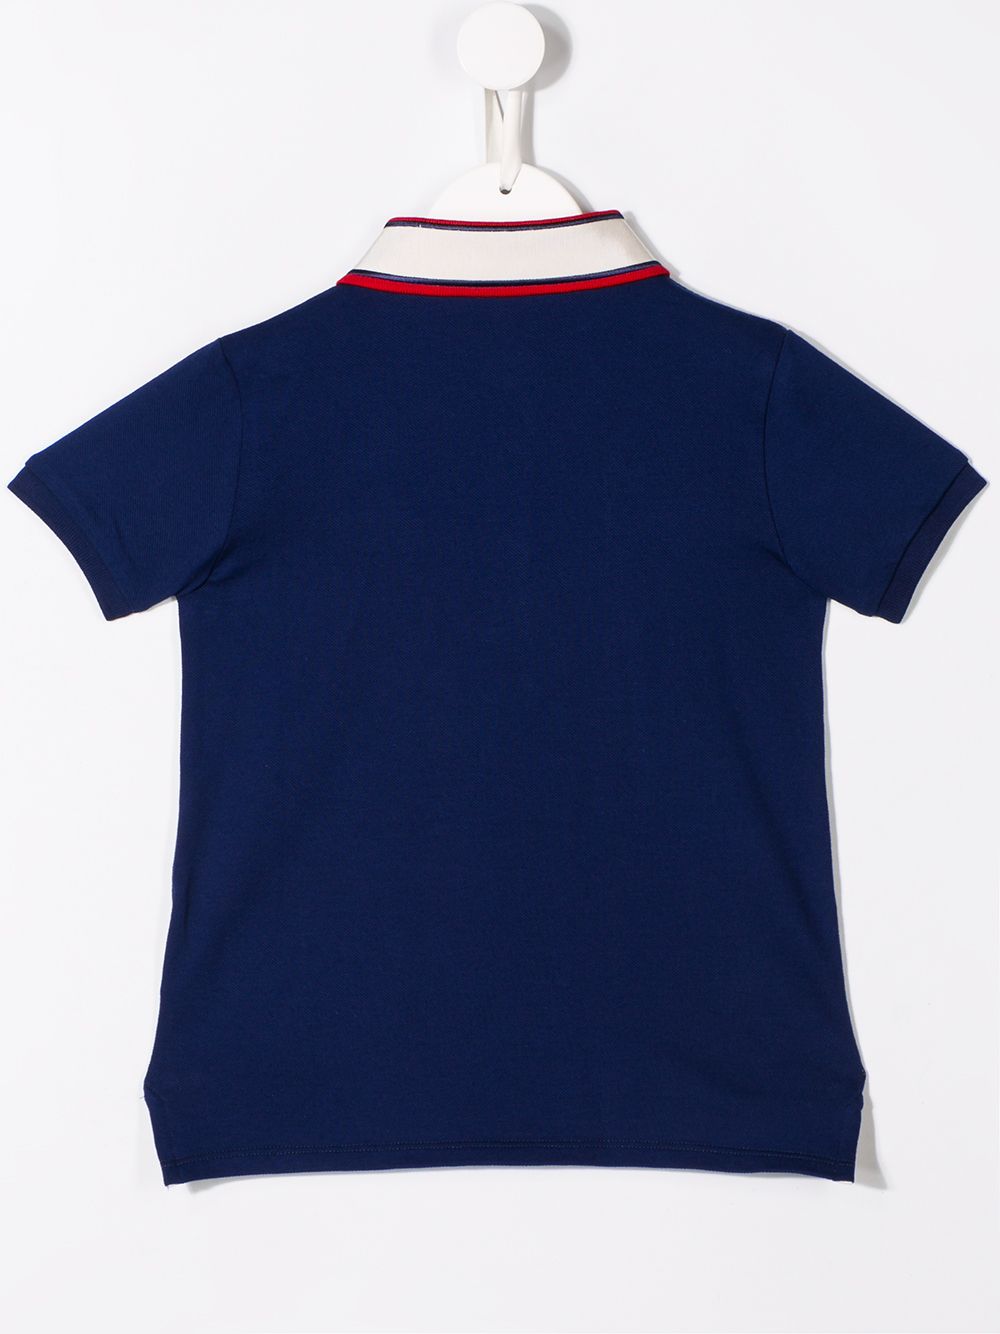 Shop blue Gucci Kids logo polo T-shirt with Express Delivery - Farfetch